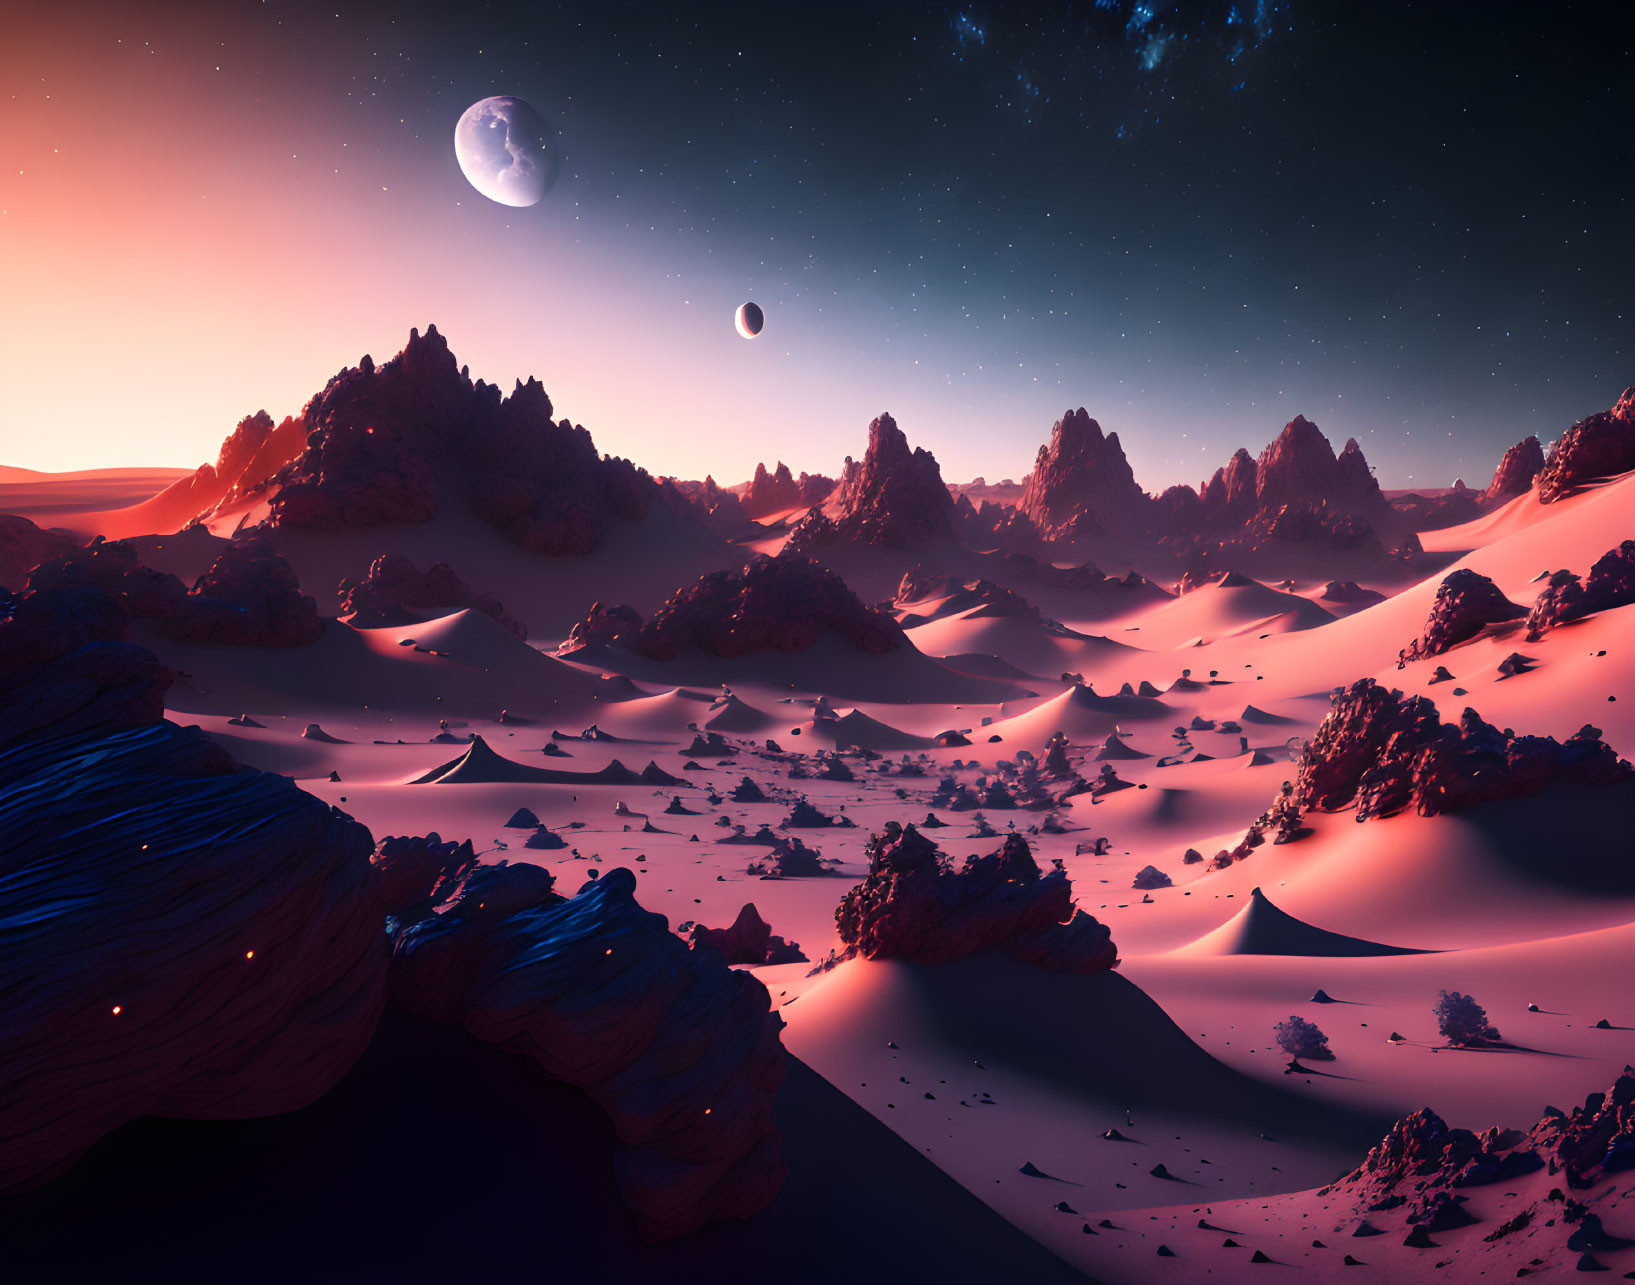 Surreal desert landscape at twilight with sand dunes and starry sky